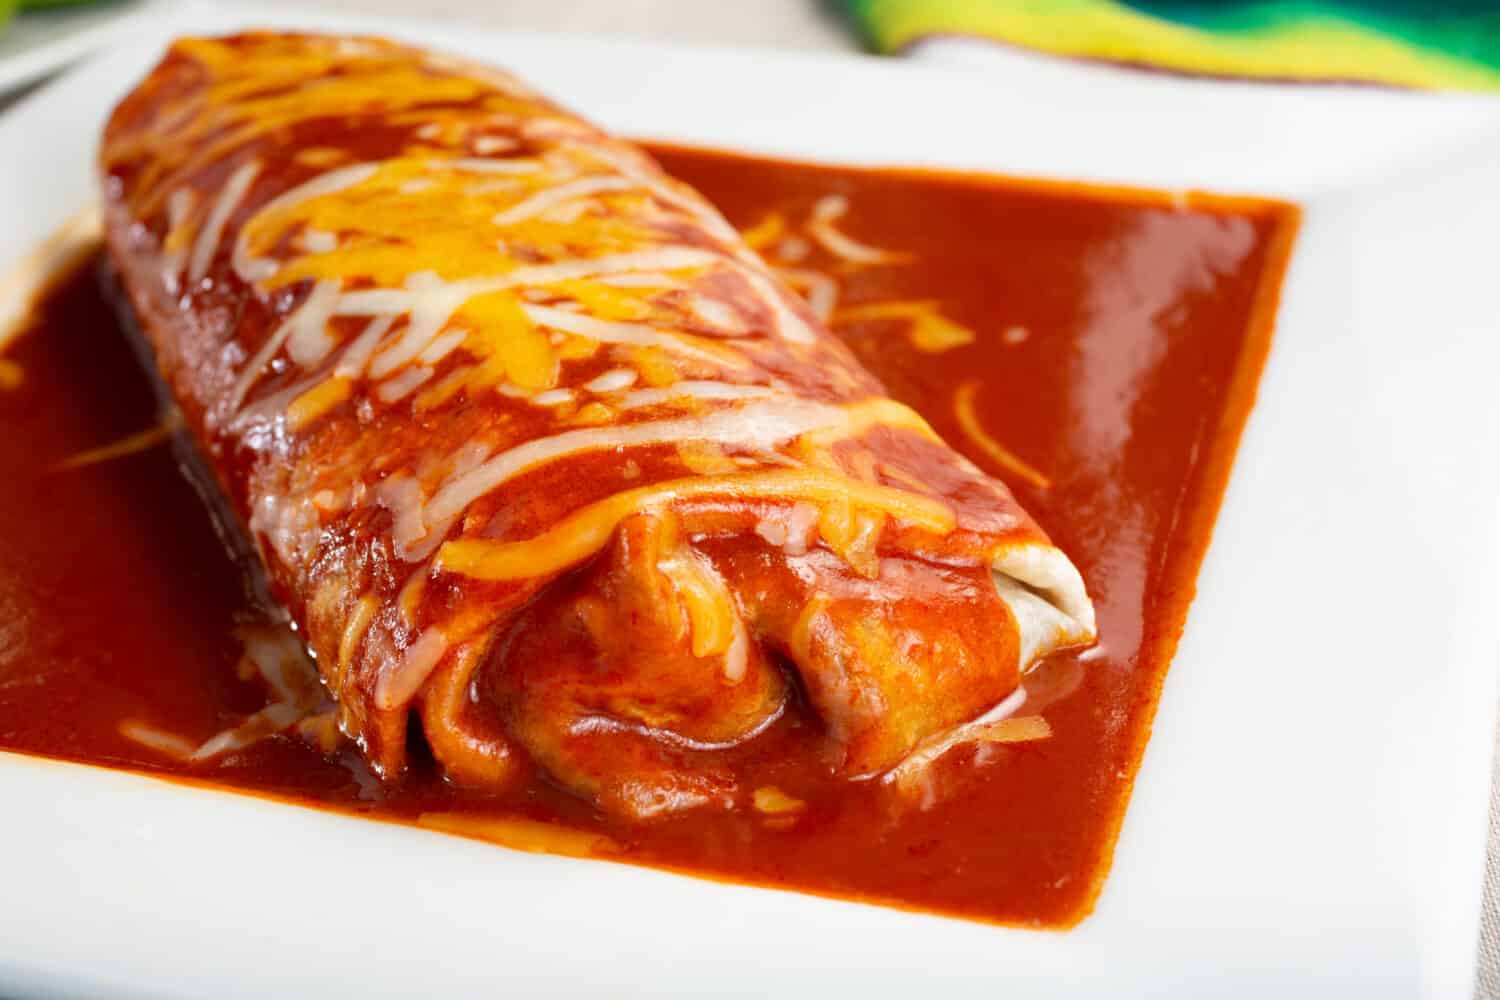 A closeup view of a wet burrito on a plate.